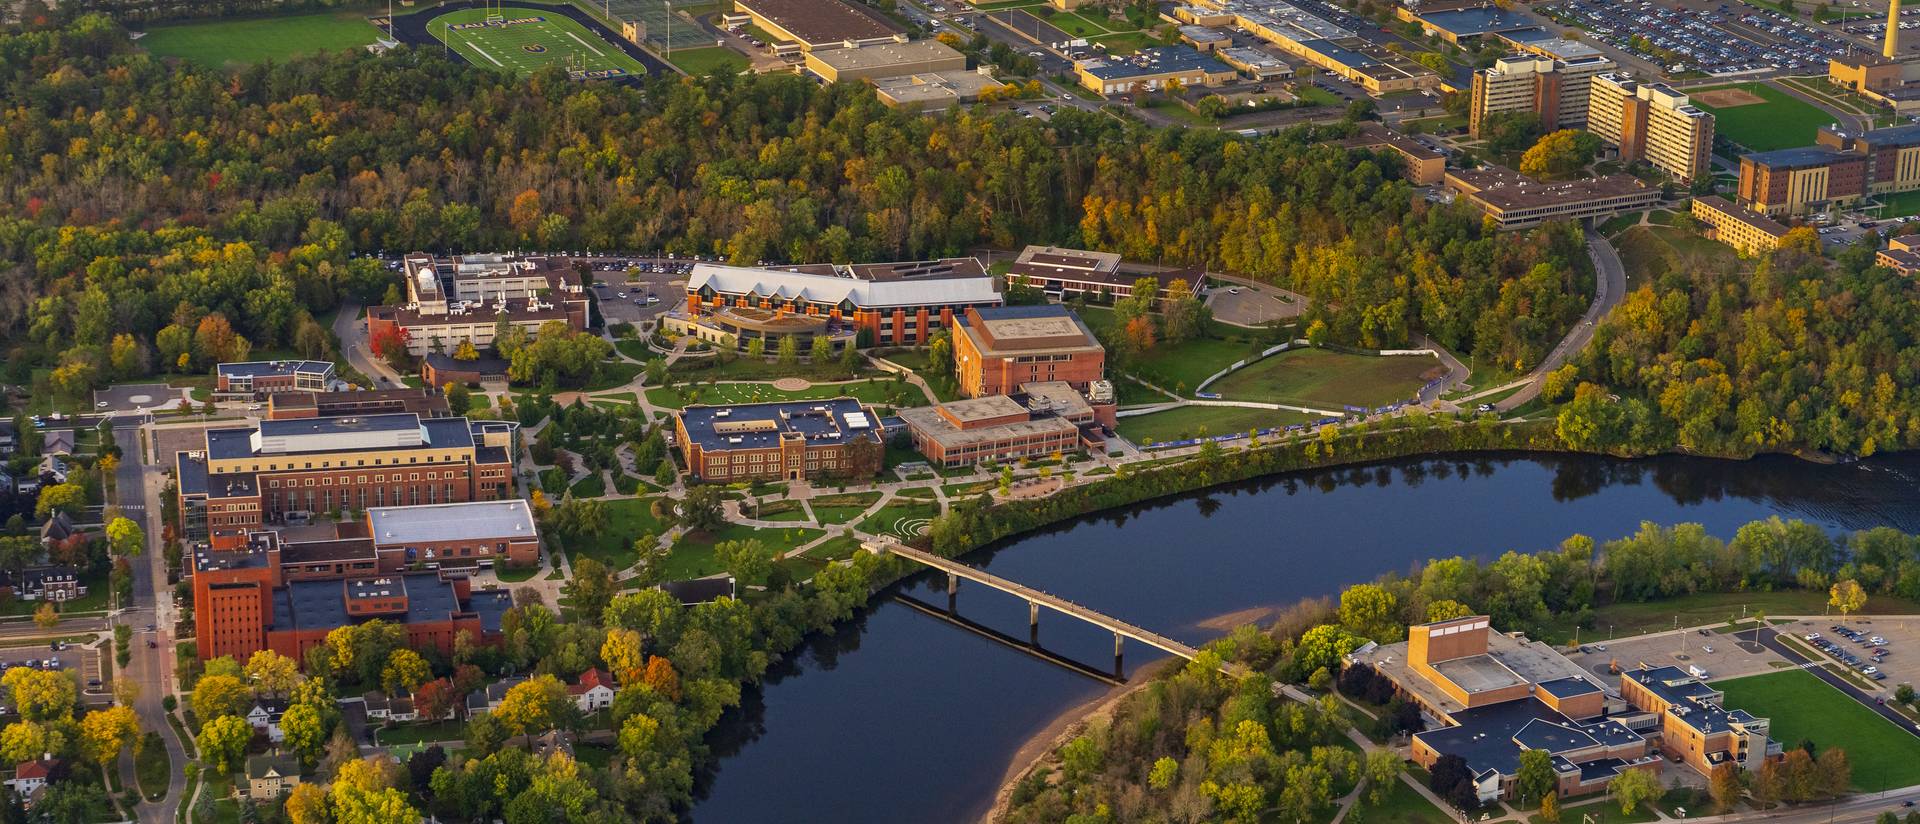 Aerial view of campus showing the river, brick academic buildings and trees turning from green to red and yellow